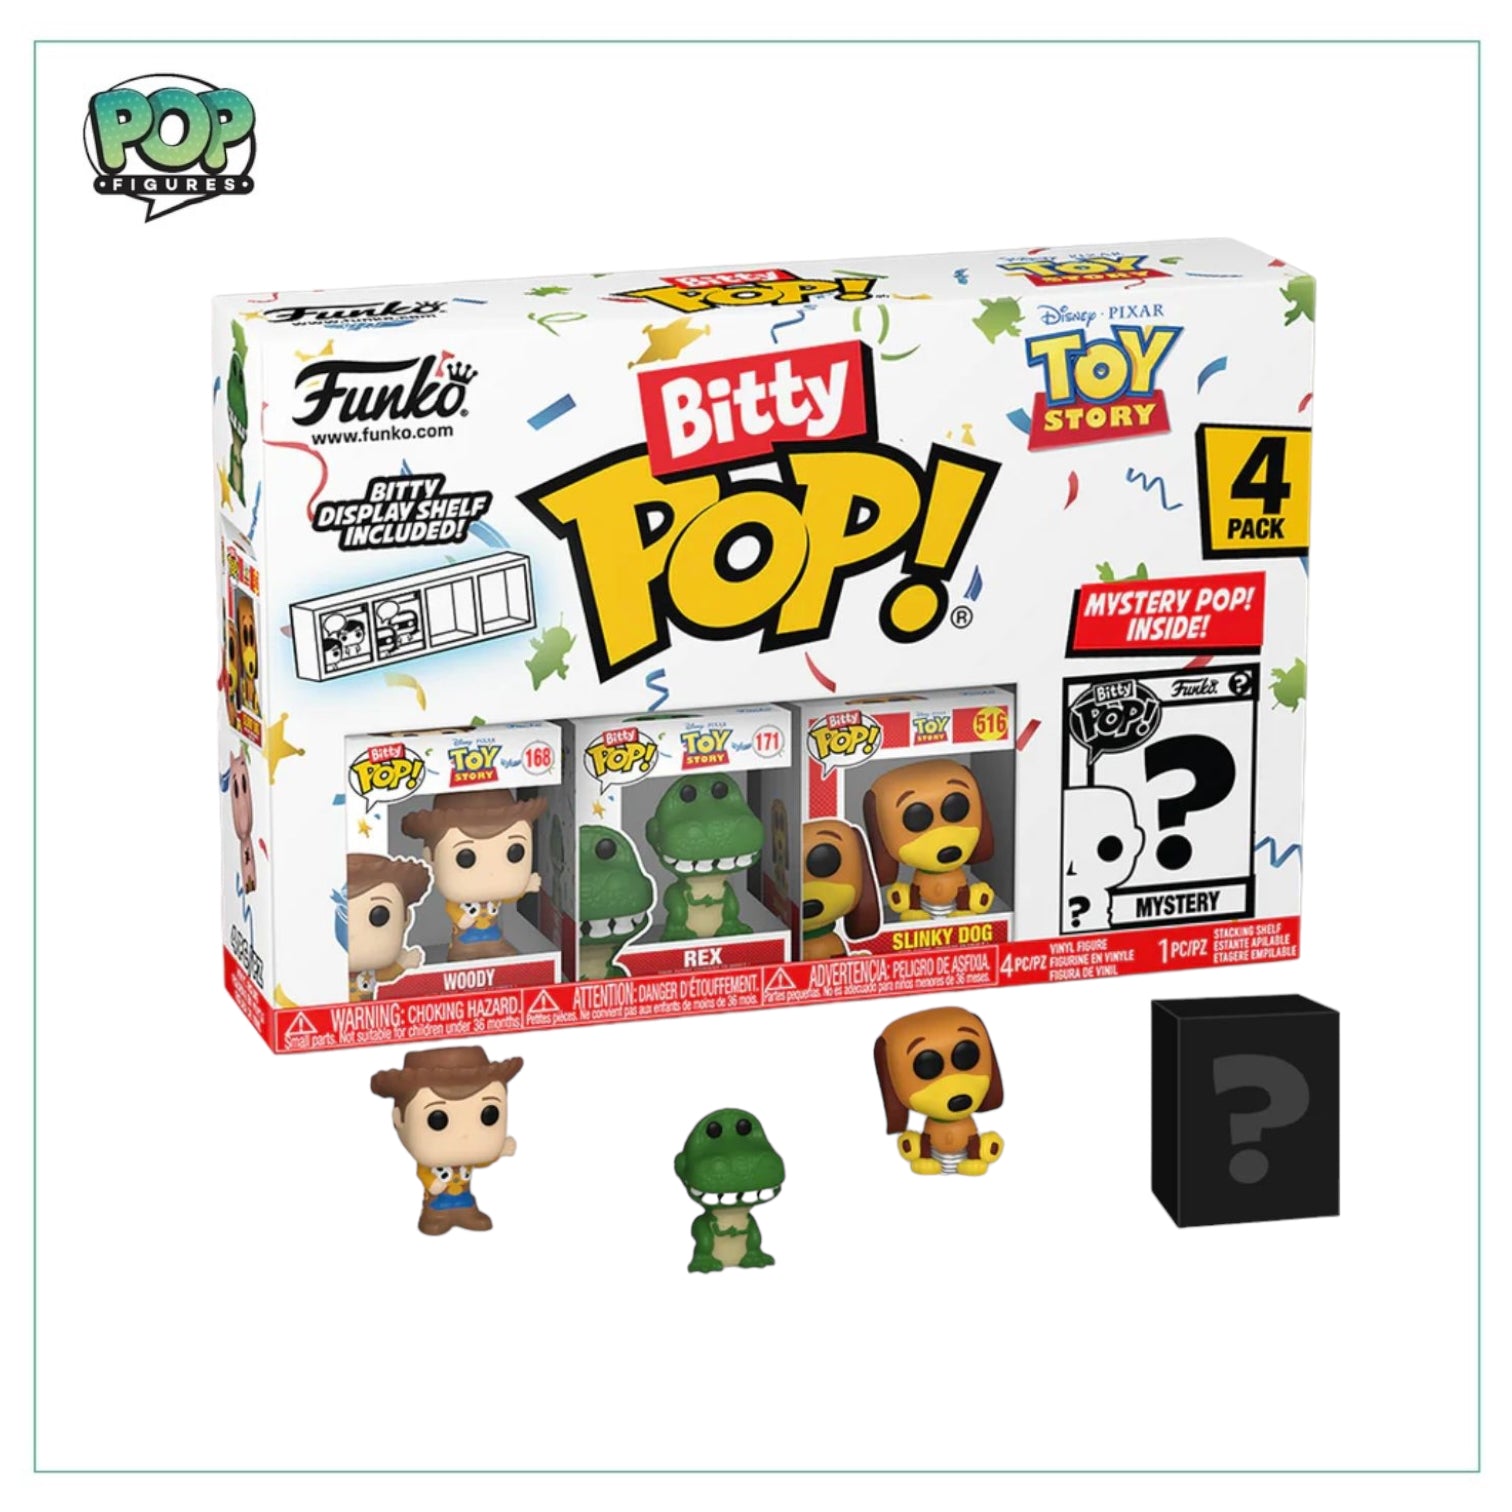 Woody 4 pack Bitty POP! - Toy Story - Chance of Chase